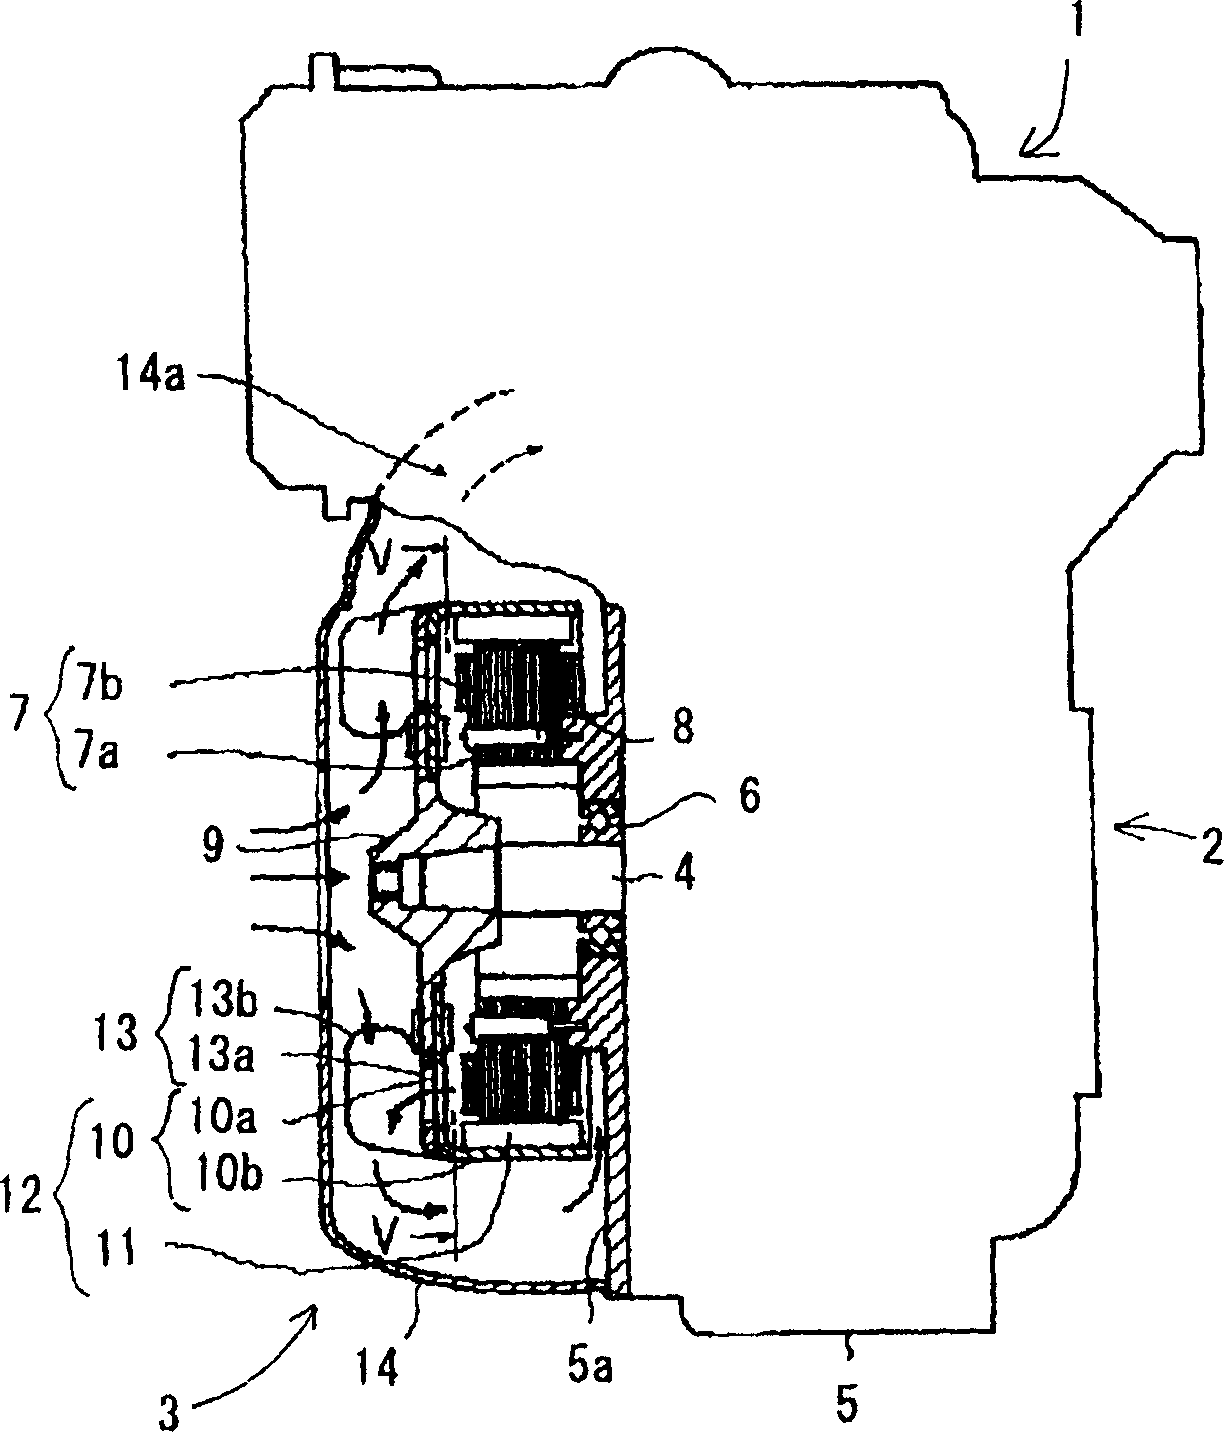 Method for igniting rotary motor without carbonbrush for driving IC engine